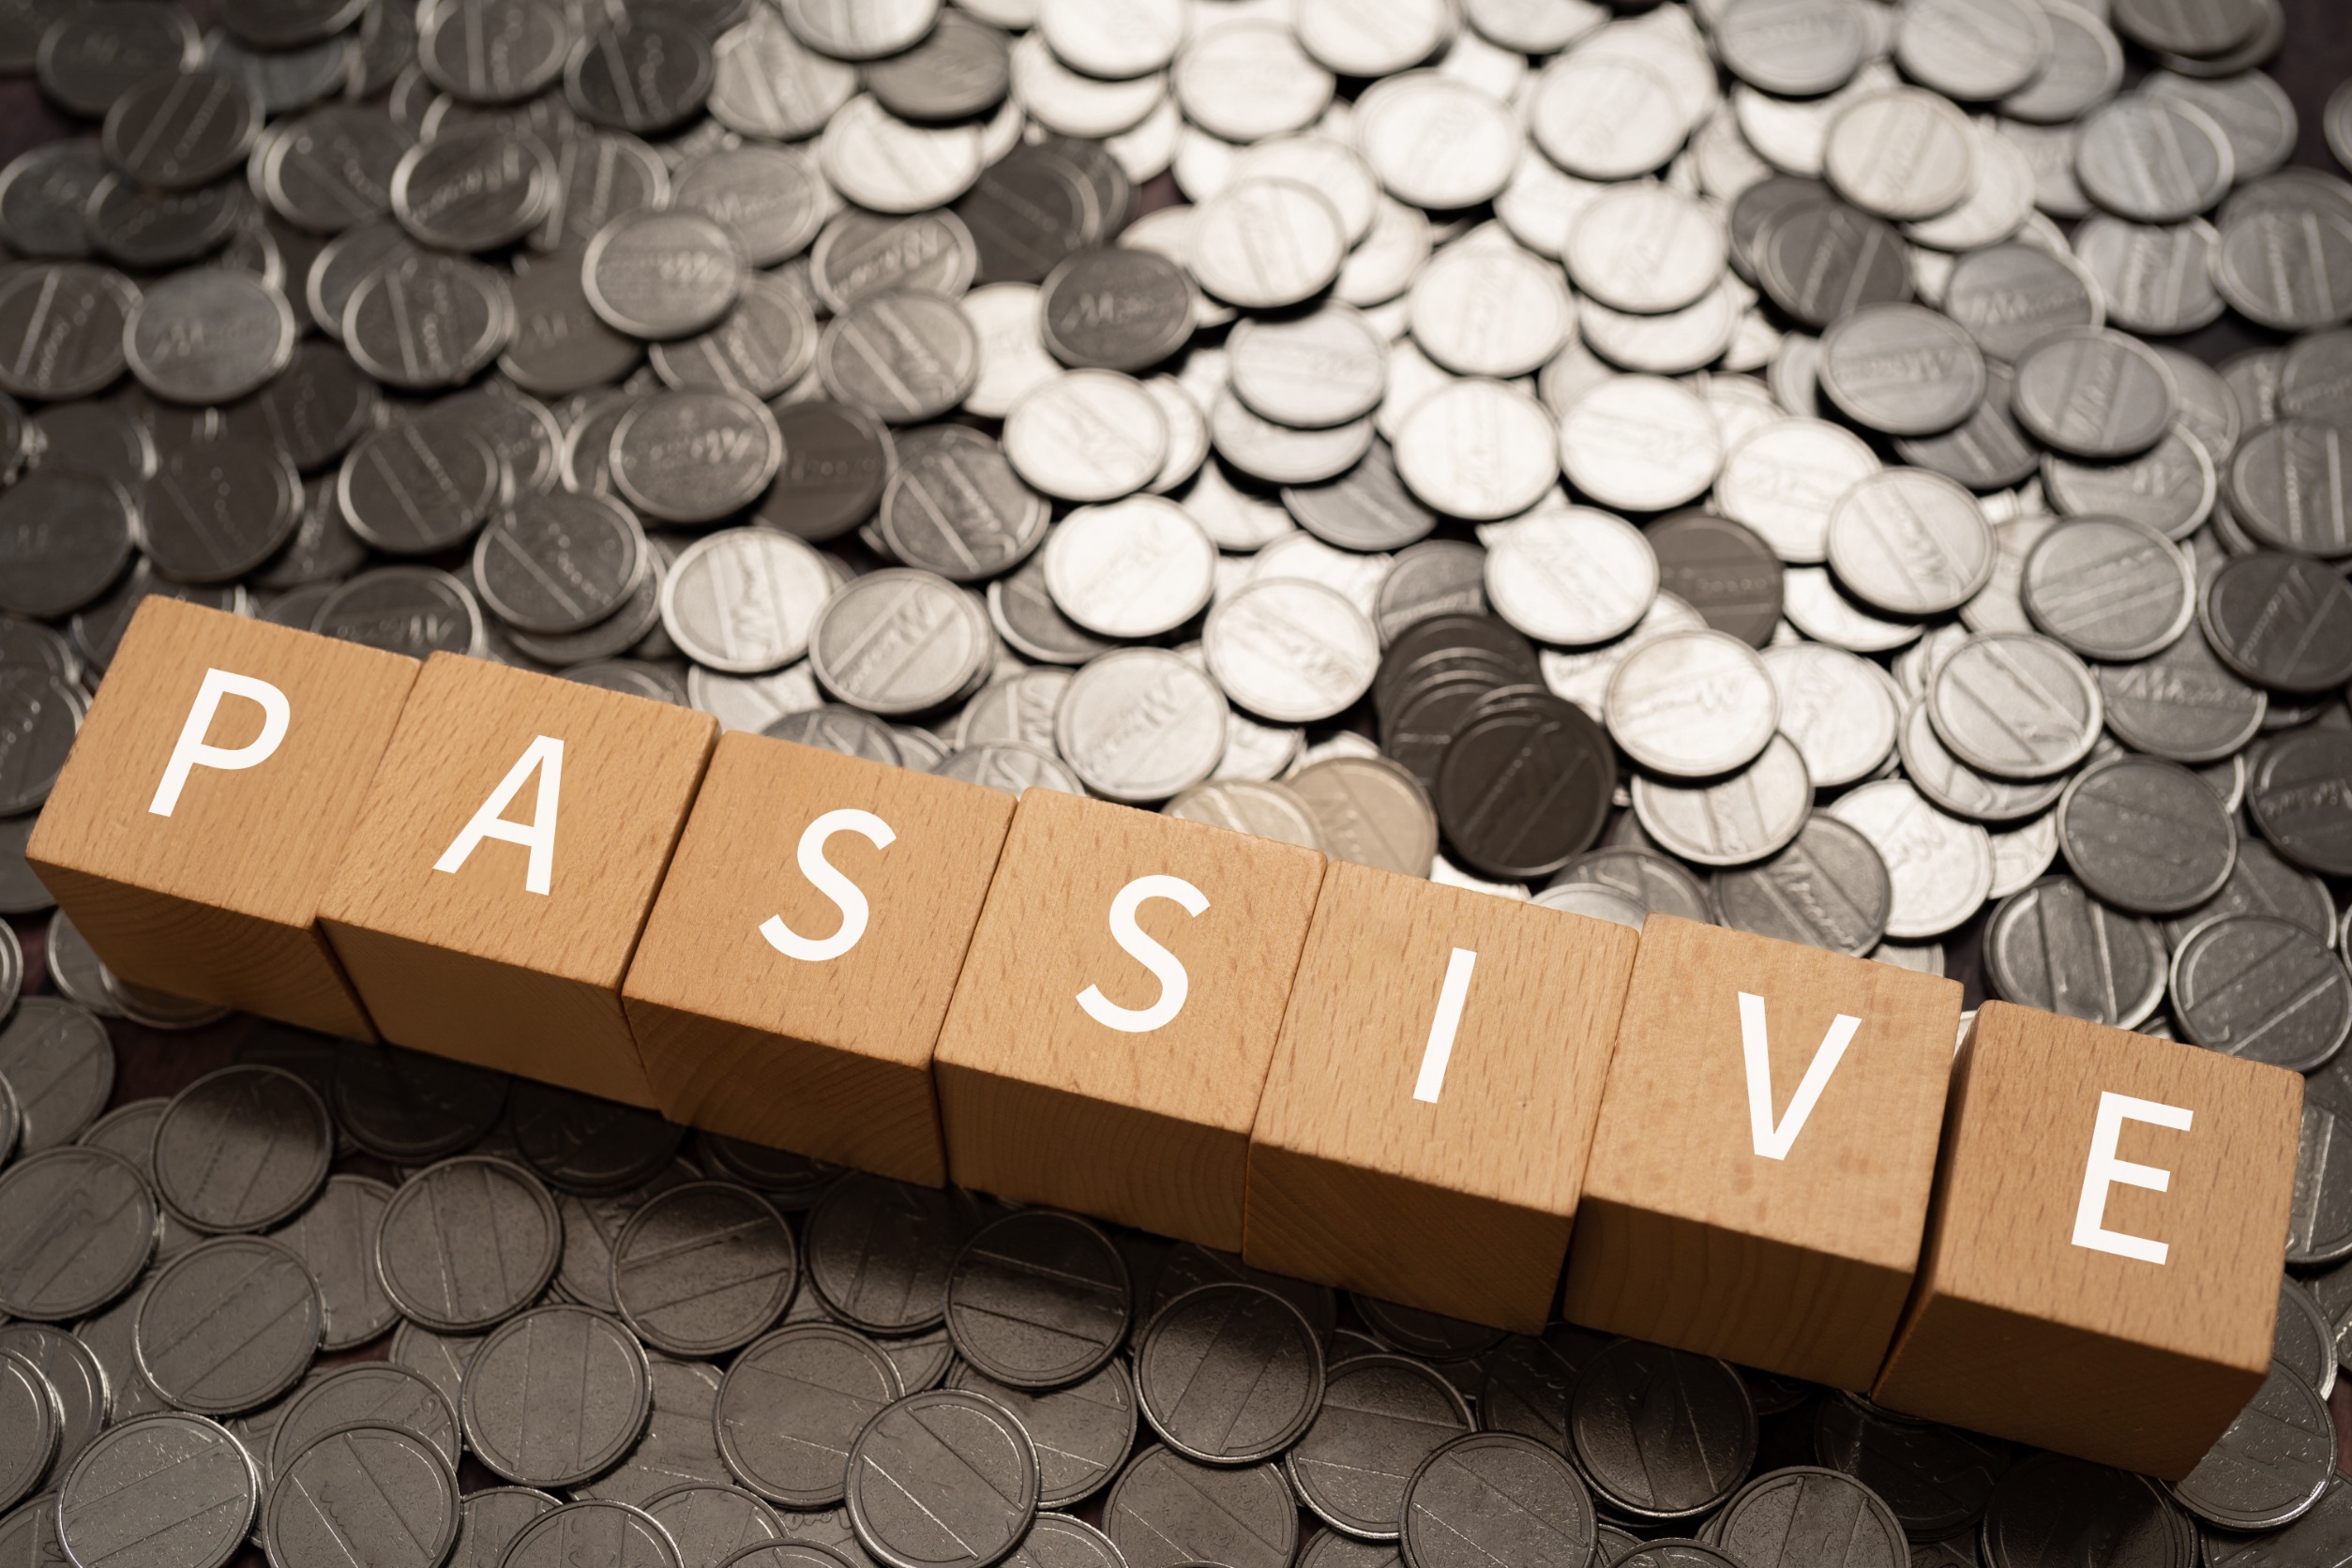 Is Passive Income Actually Passive? -Taking Control of Your Financial Future - Freedom Founders